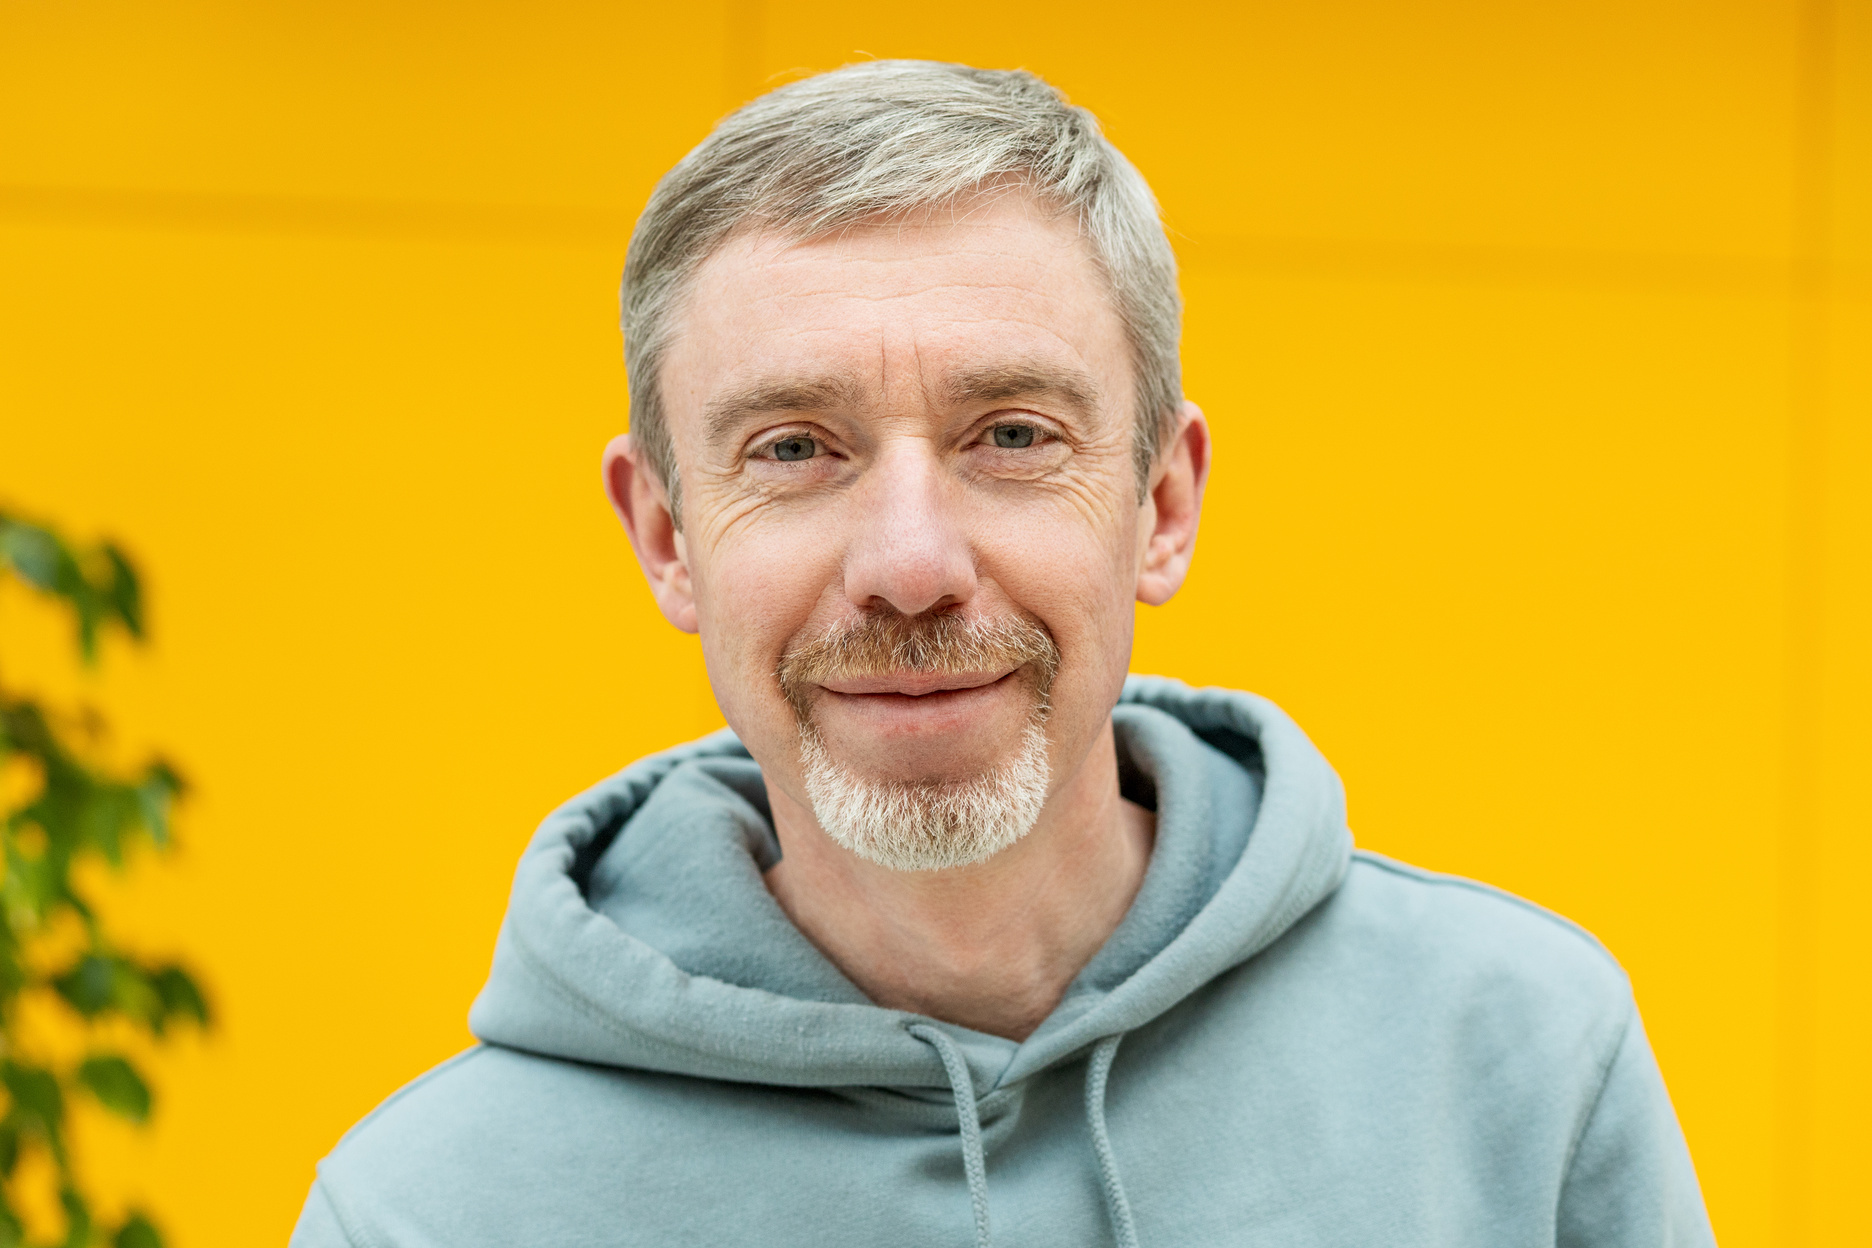 Close up portrait of happy 50 year old white bearded man in hooded shirt